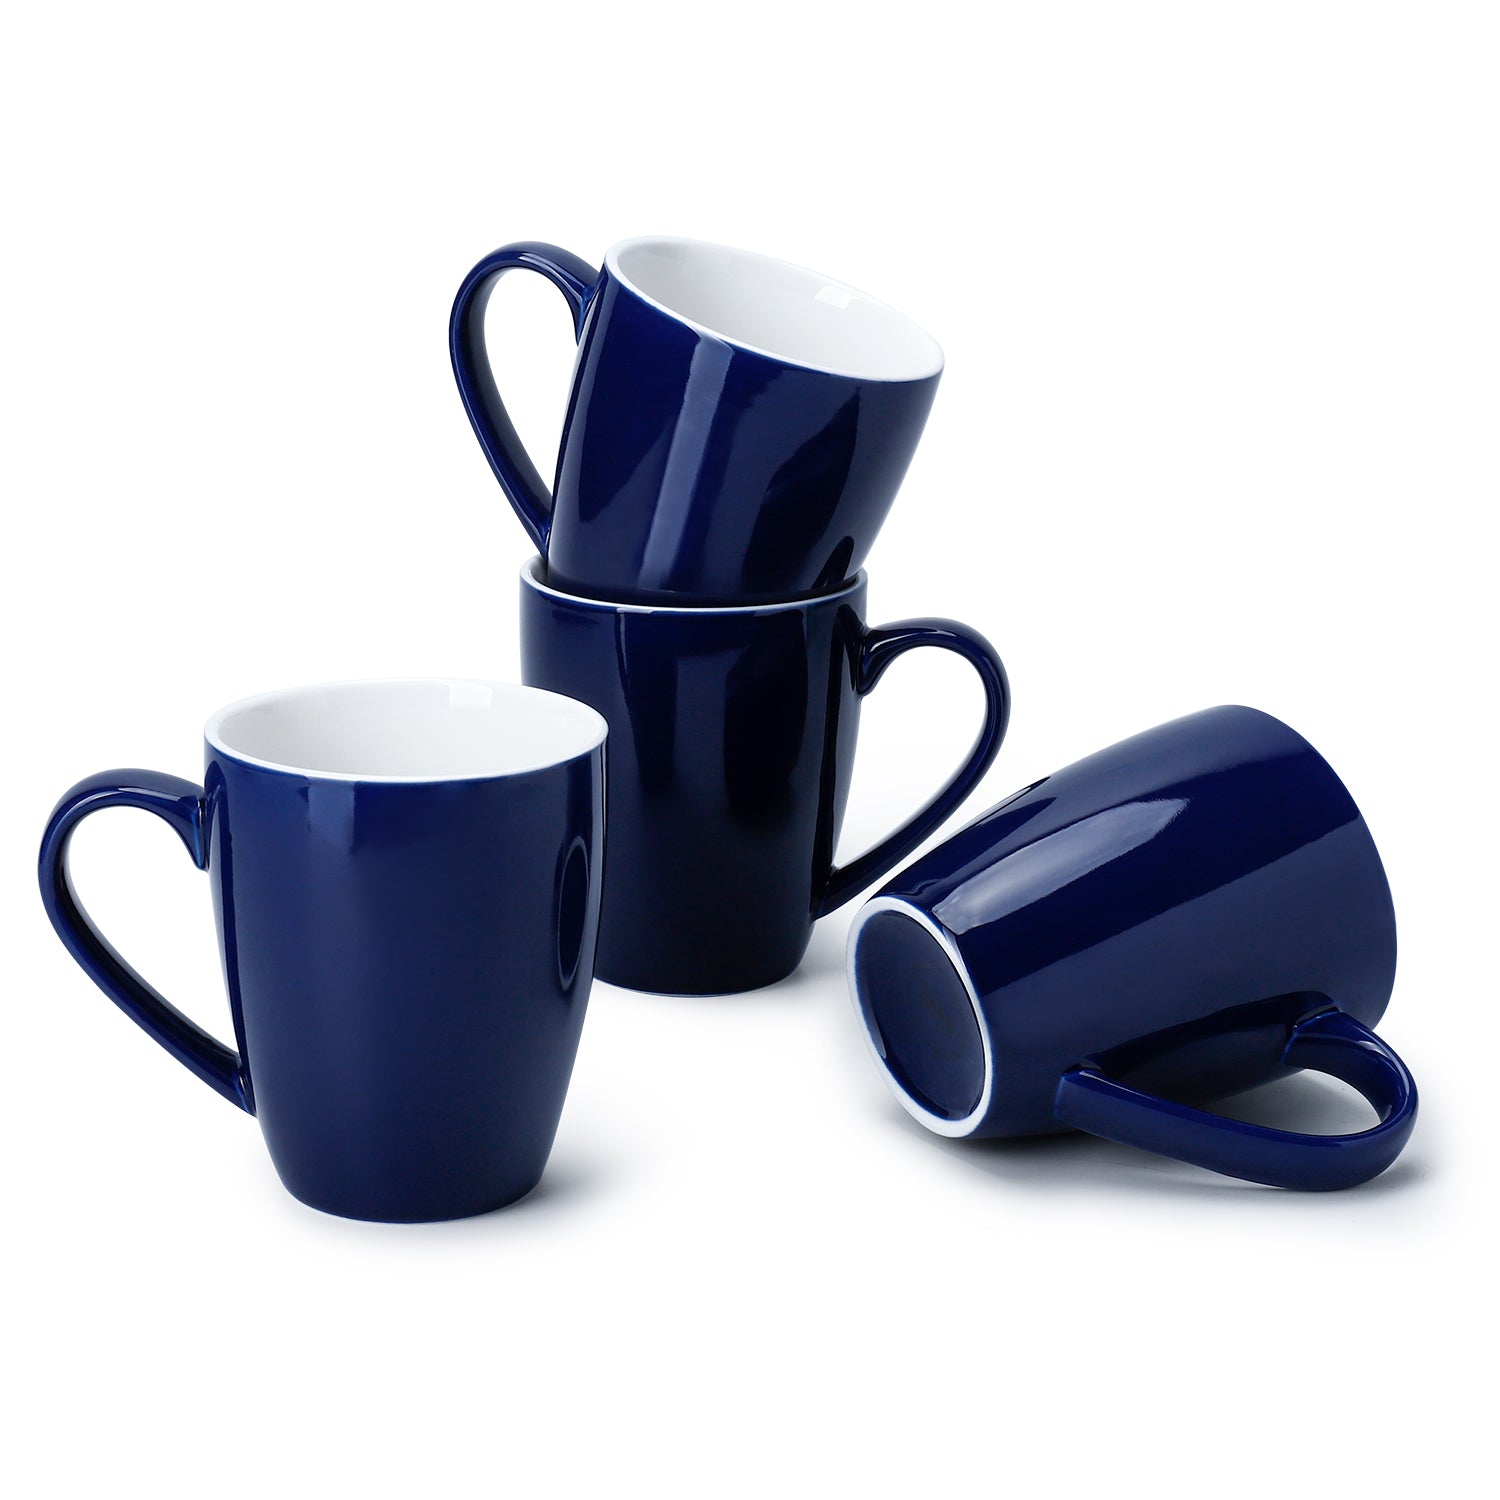 Sweese 601.414 Porcelain Mugs - 16 Ounce (Top to the Rim) for